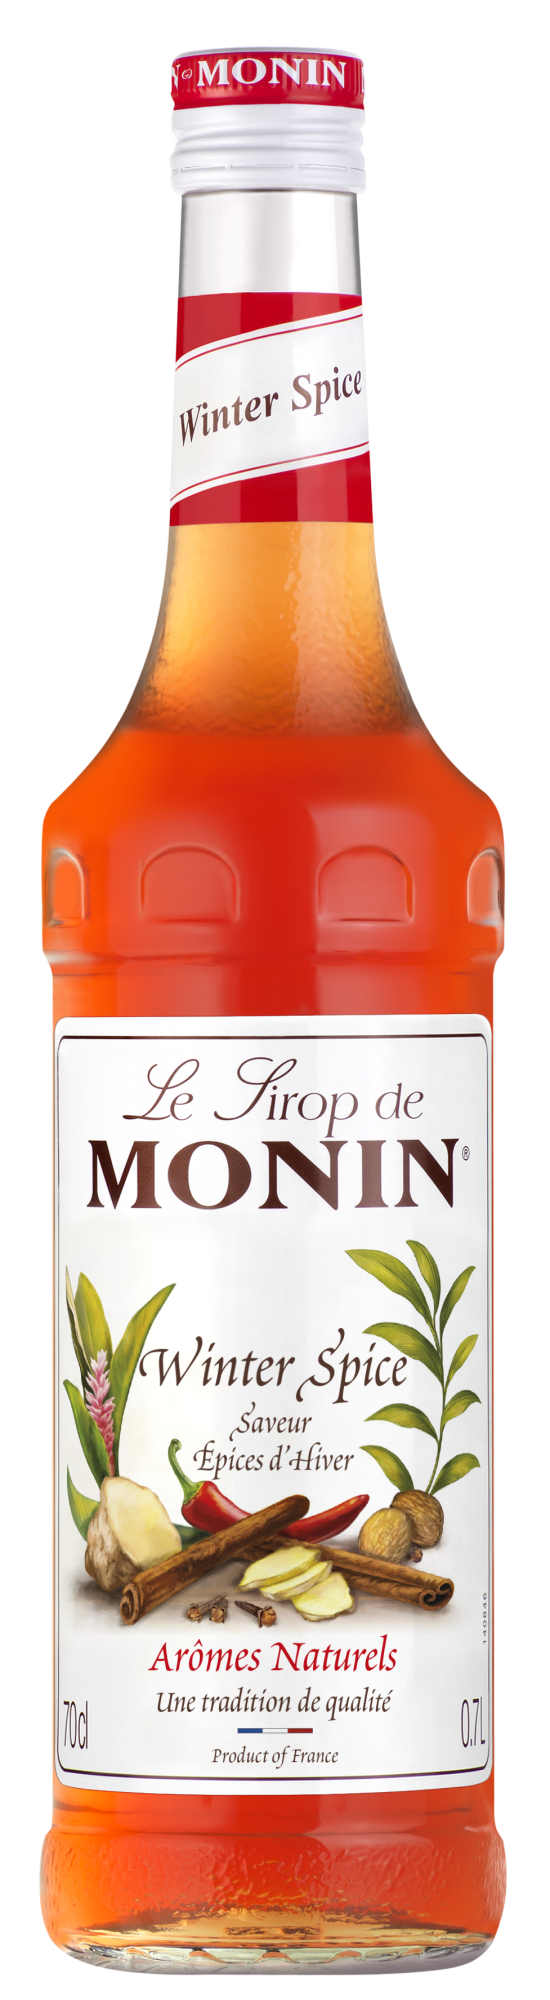 Buy MONIN Winter Spice syrup. It is a delicious blend of spices to add interest to all your winter drinks.